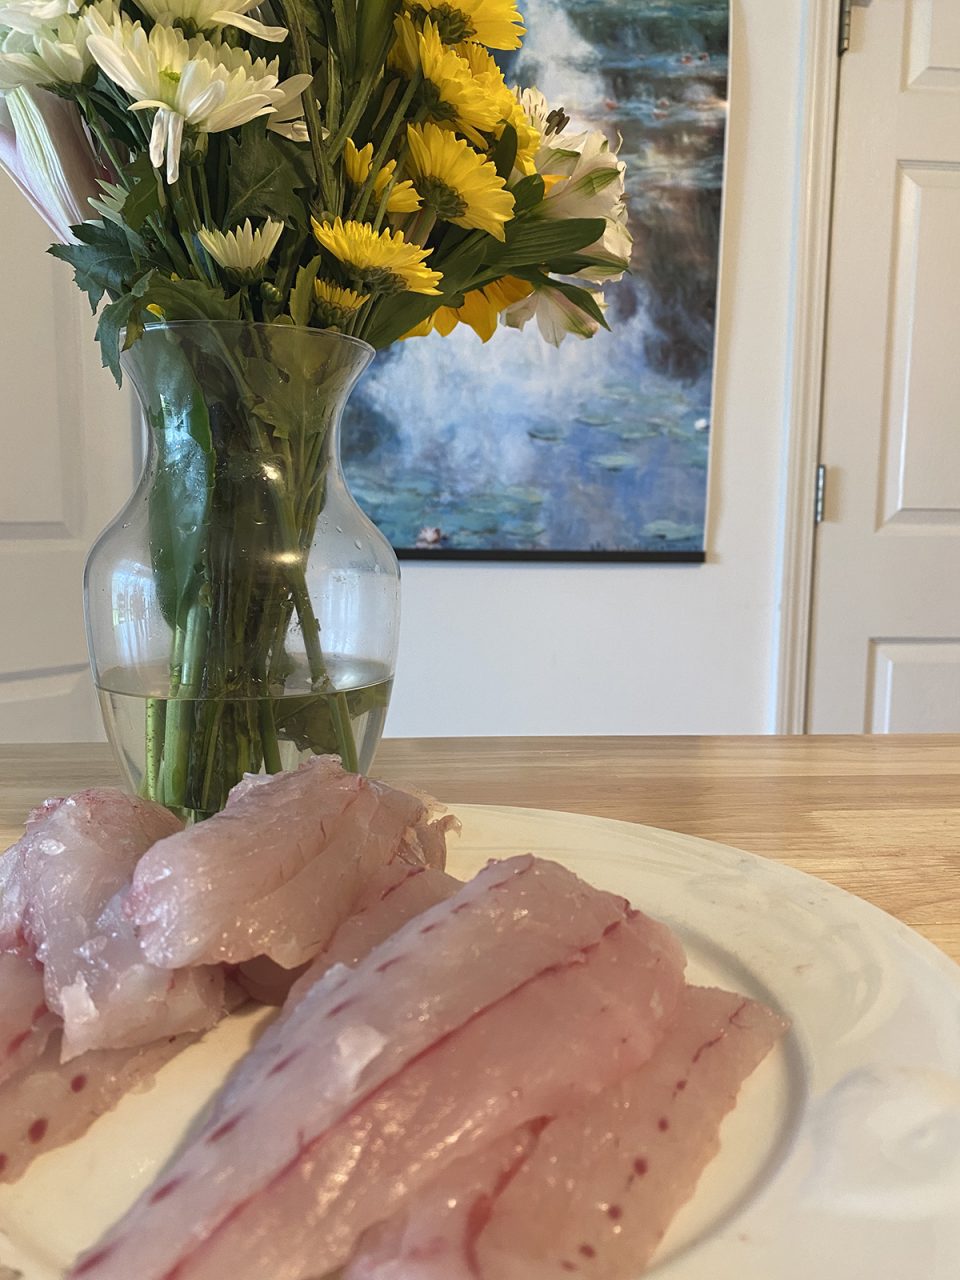 Freshly caught speckled trout fillets glisten and don’t smell. Photo: Capt. Gordon Churchill